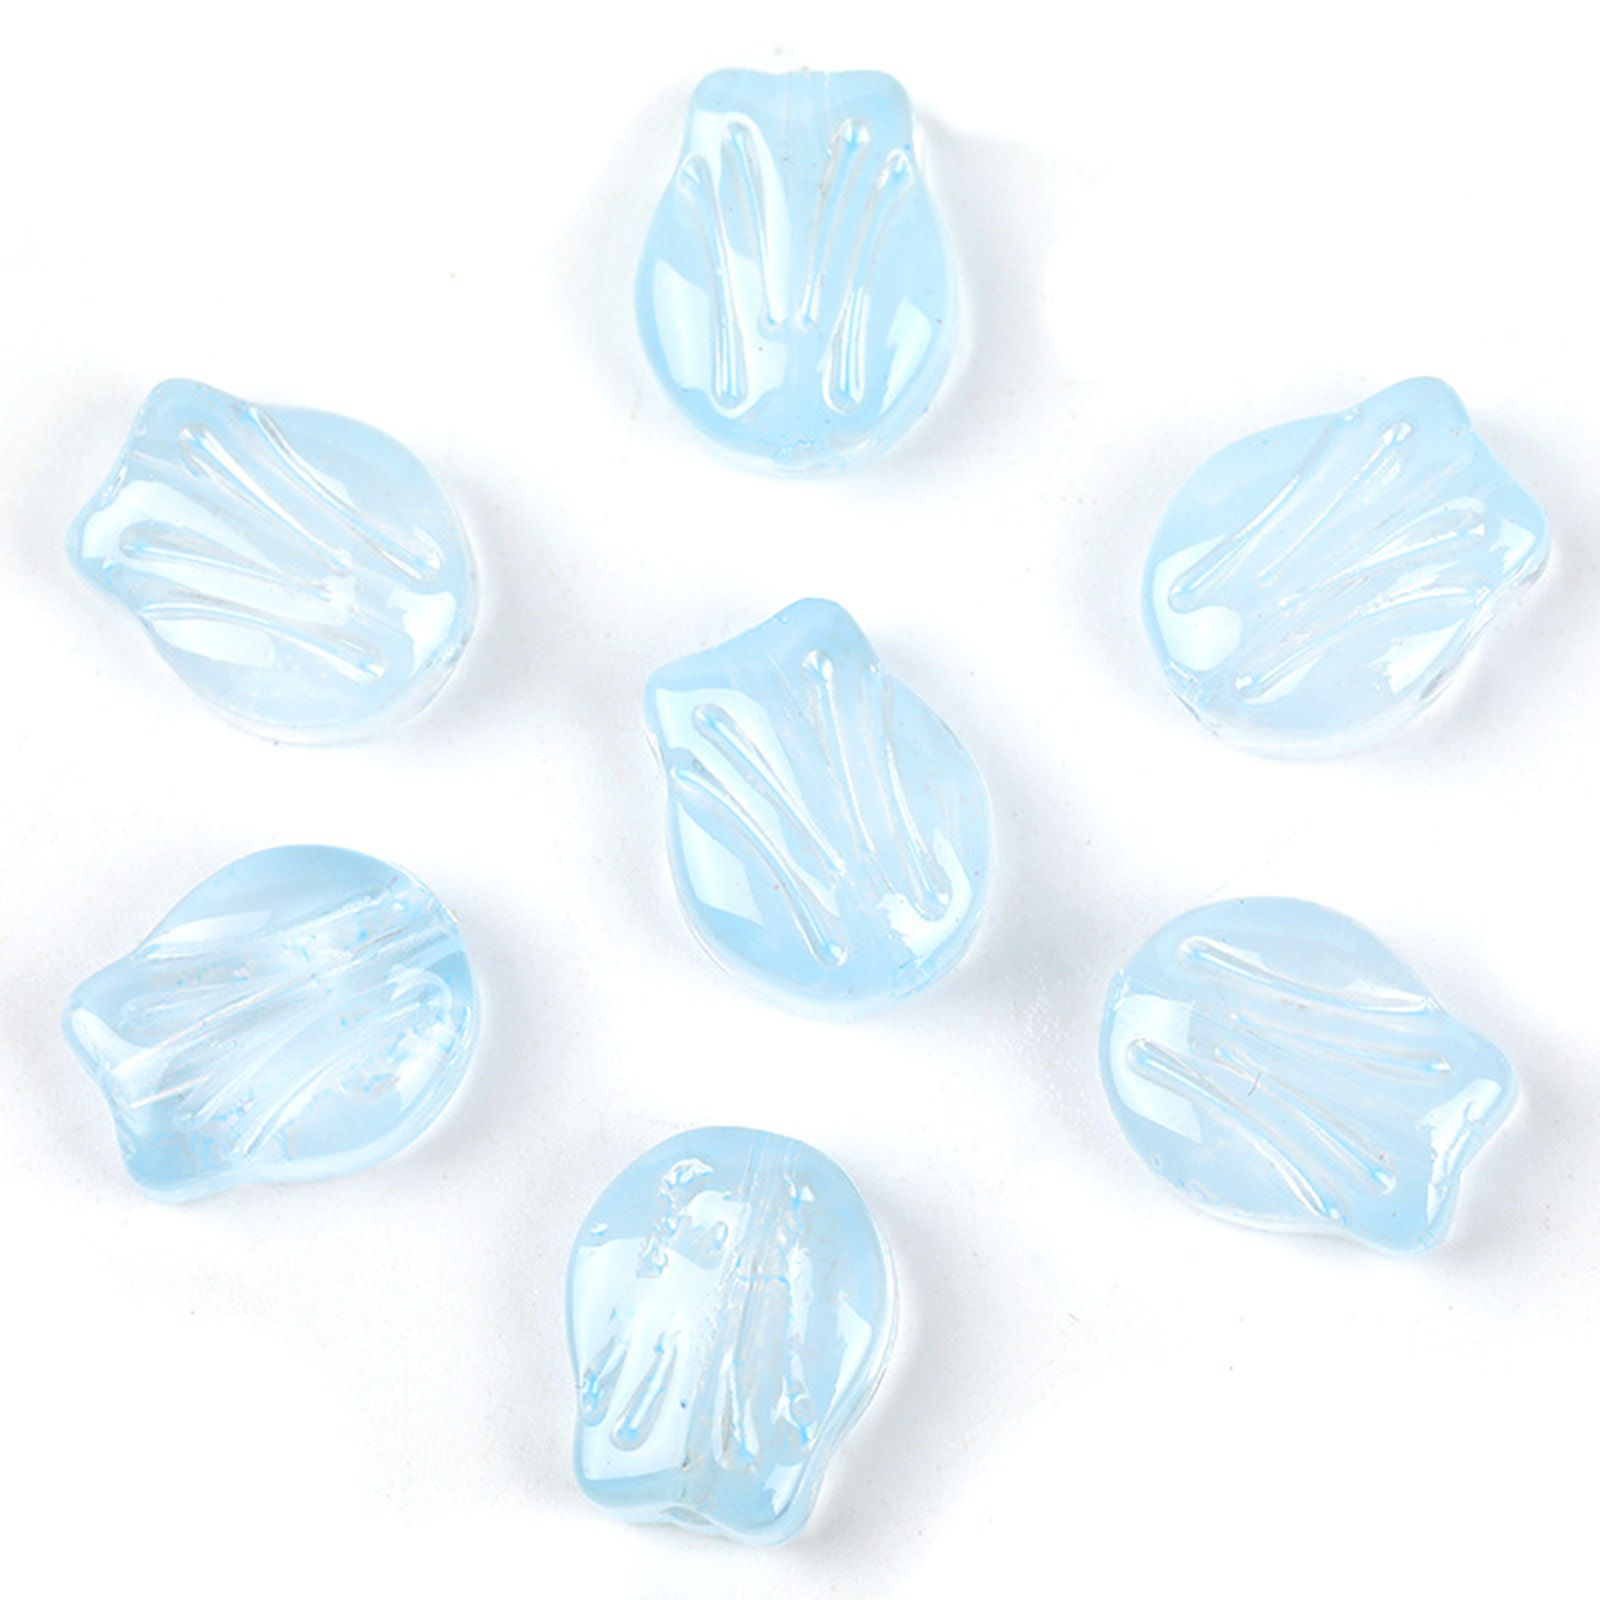 Picture of Lampwork Glass Beads Tulip Flower Skyblue Gradient Color About 10.5mm x 8.4mm, Hole: Approx 0.8mm, 20 PCs